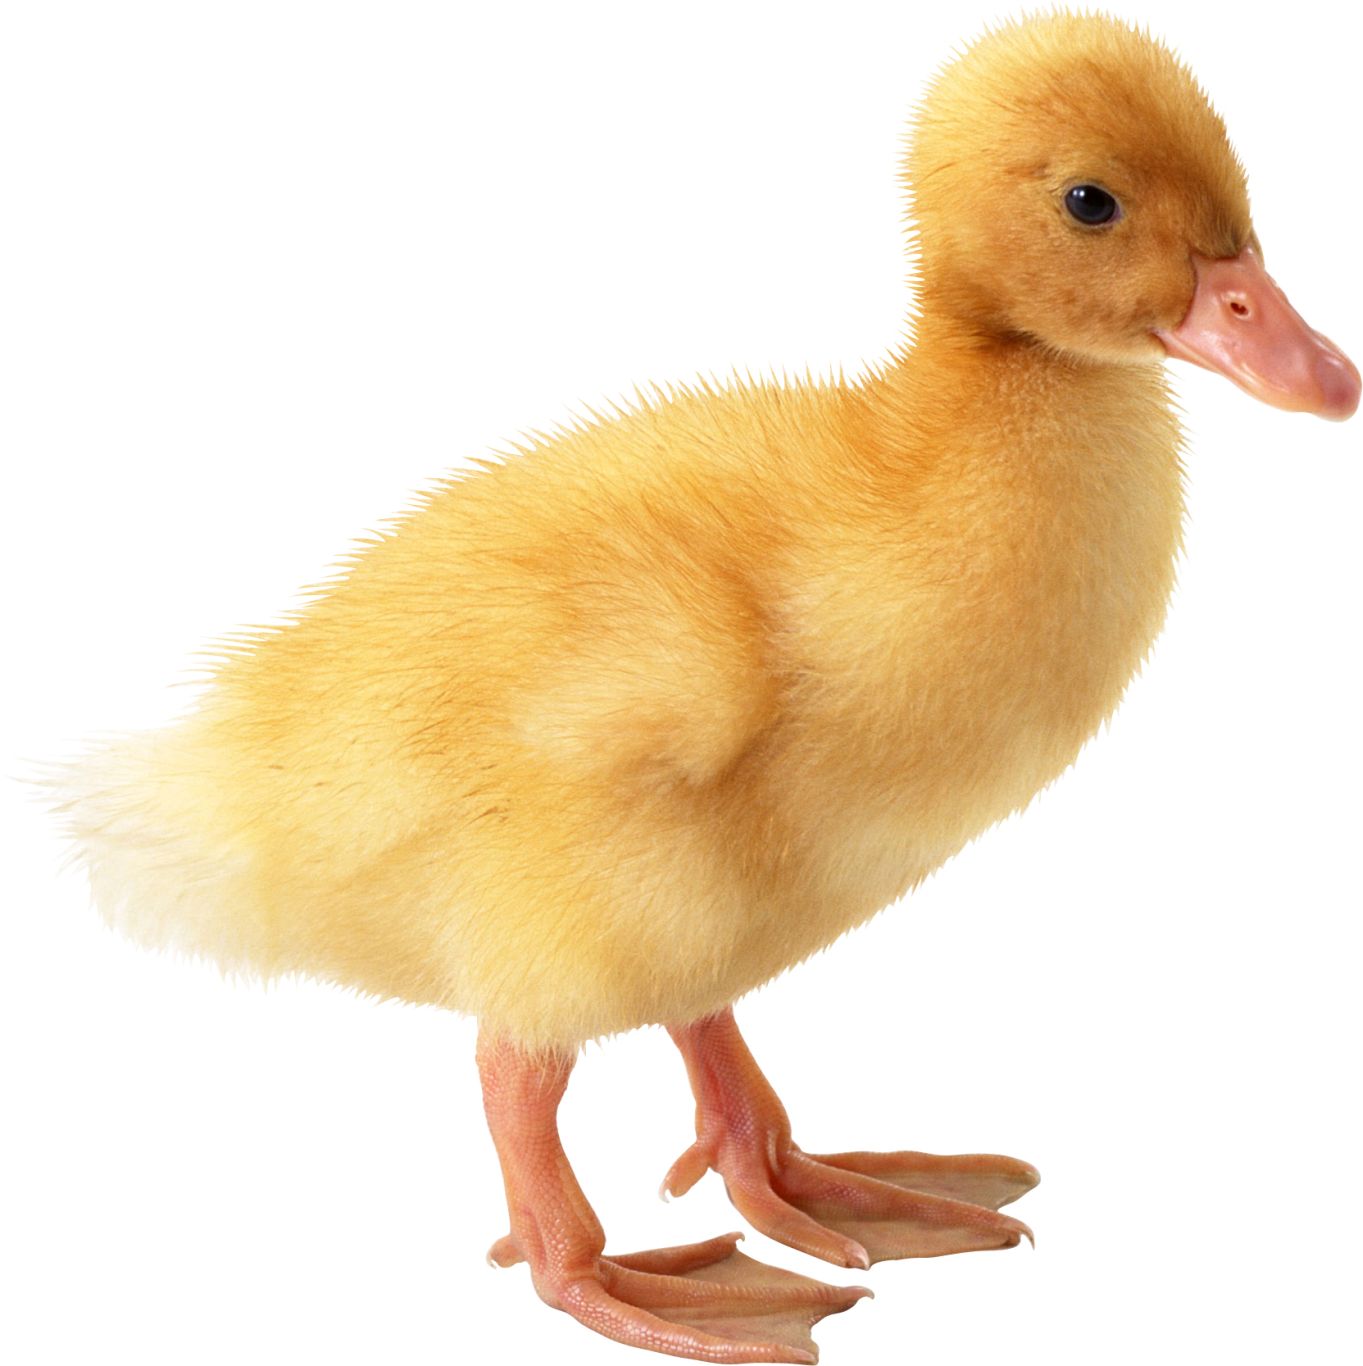 Little yellow duck PNG image    图片编号:5032